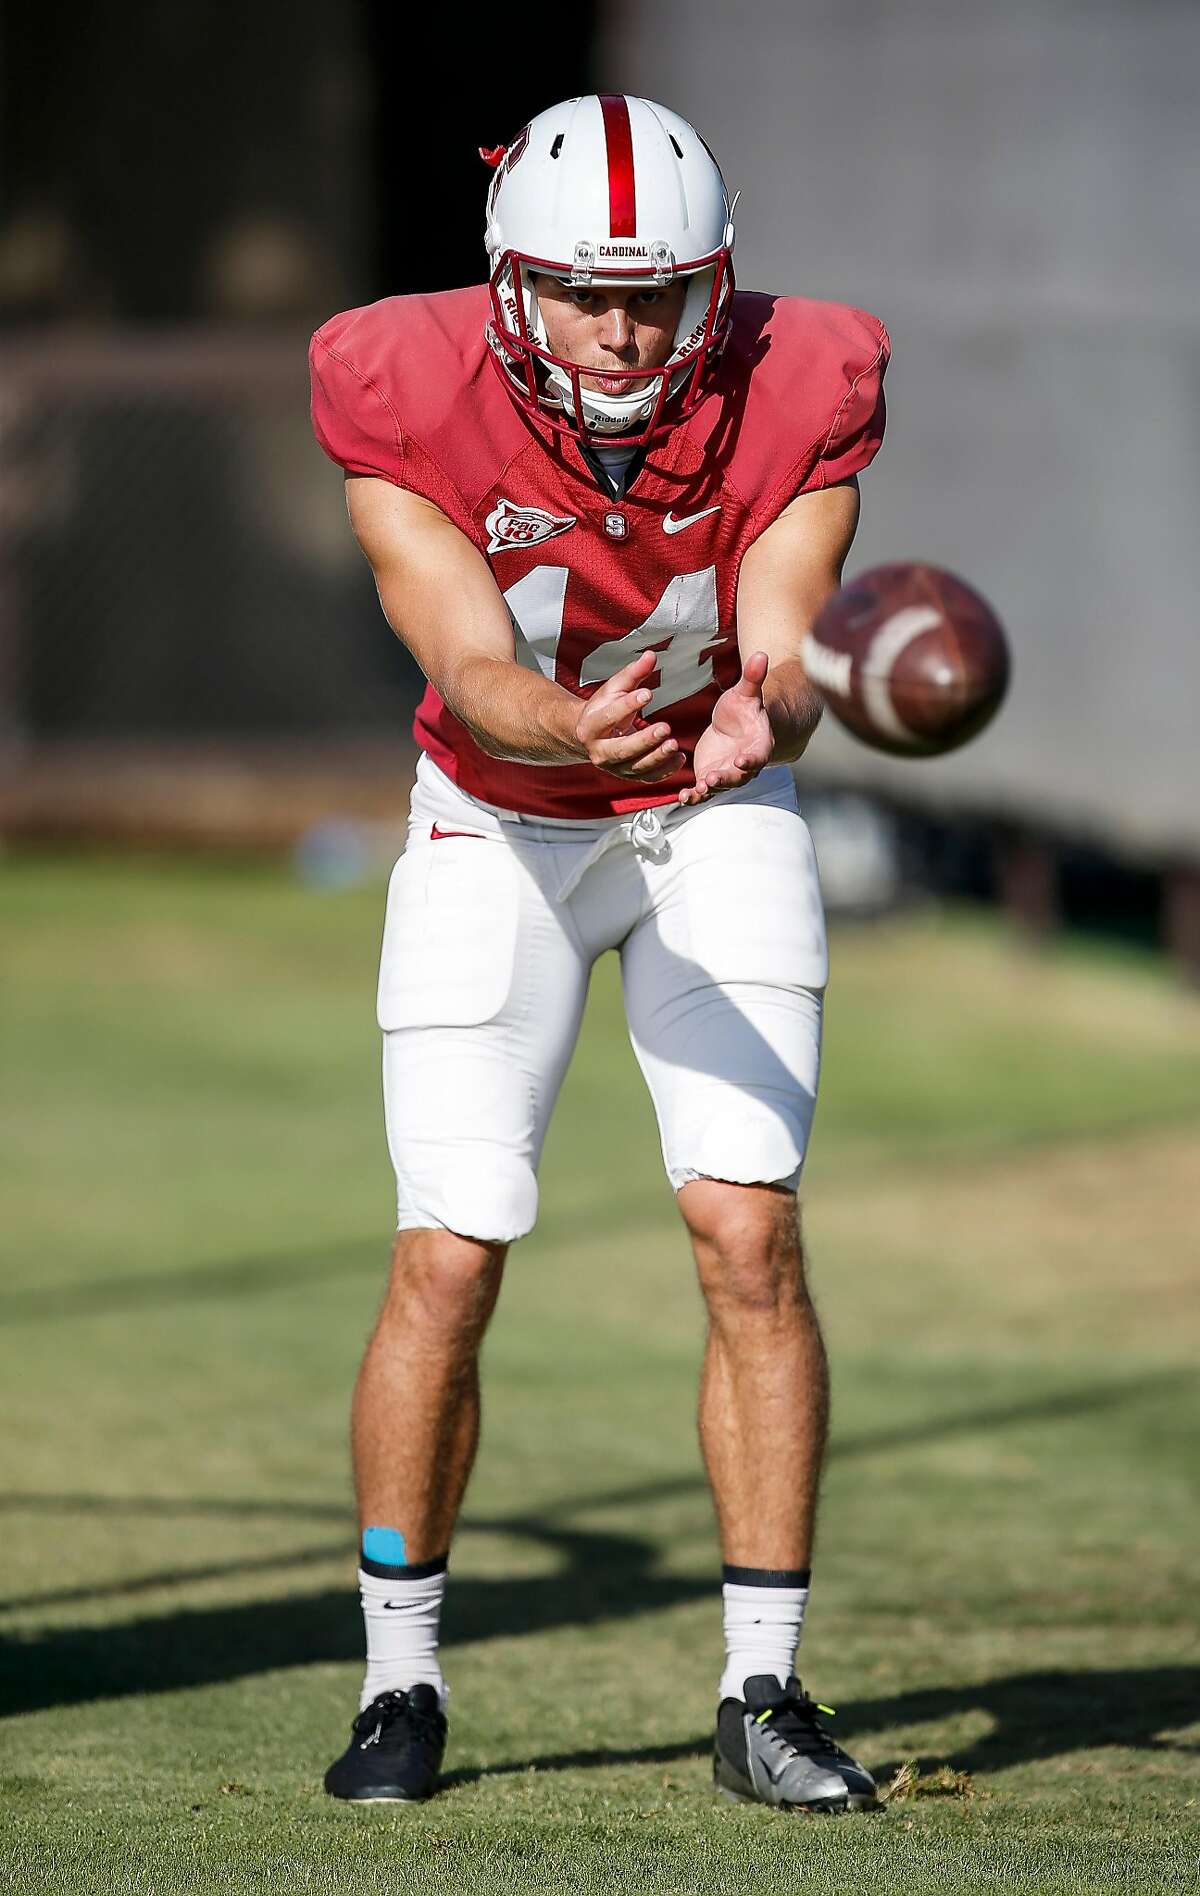 Stanford punter Jake Bailey runs through some drills during football practice on Tuesday, Sept. 13, 2016 in Stanford, Calif.